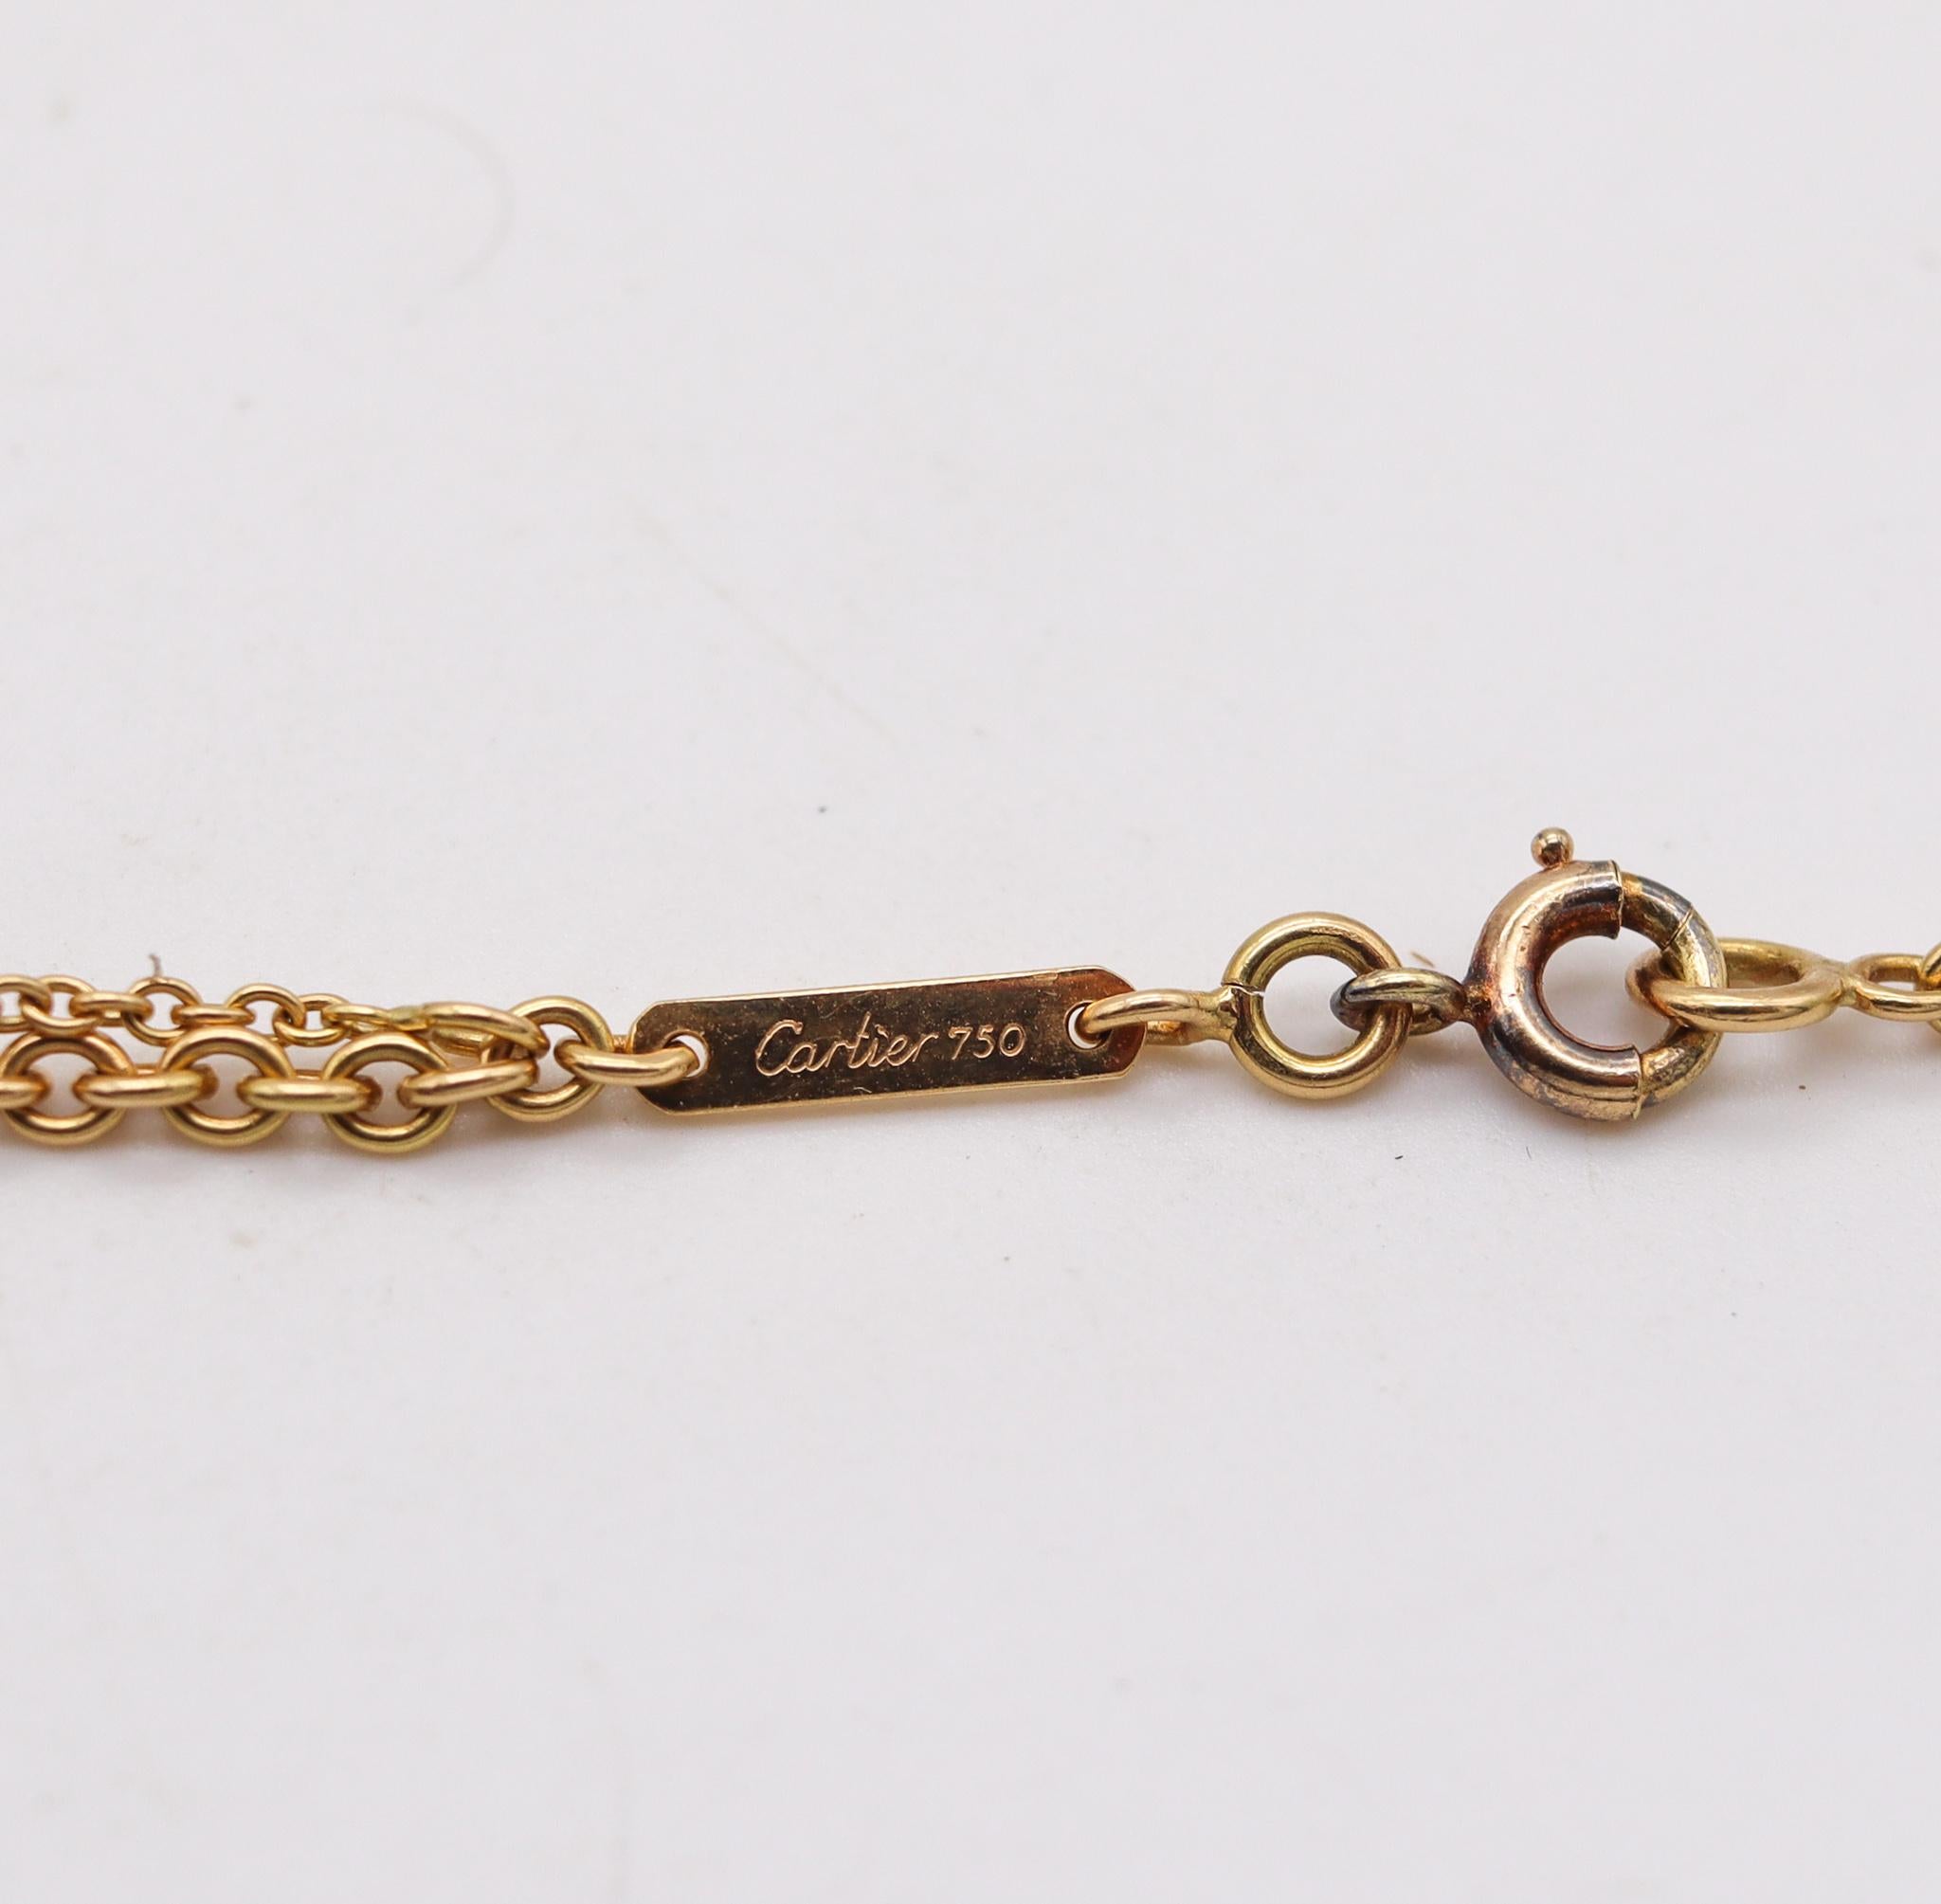 Modernist Cartier Paris 1970's Panthere Necklace Chain In 18Kt Yellow Gold And Silverium